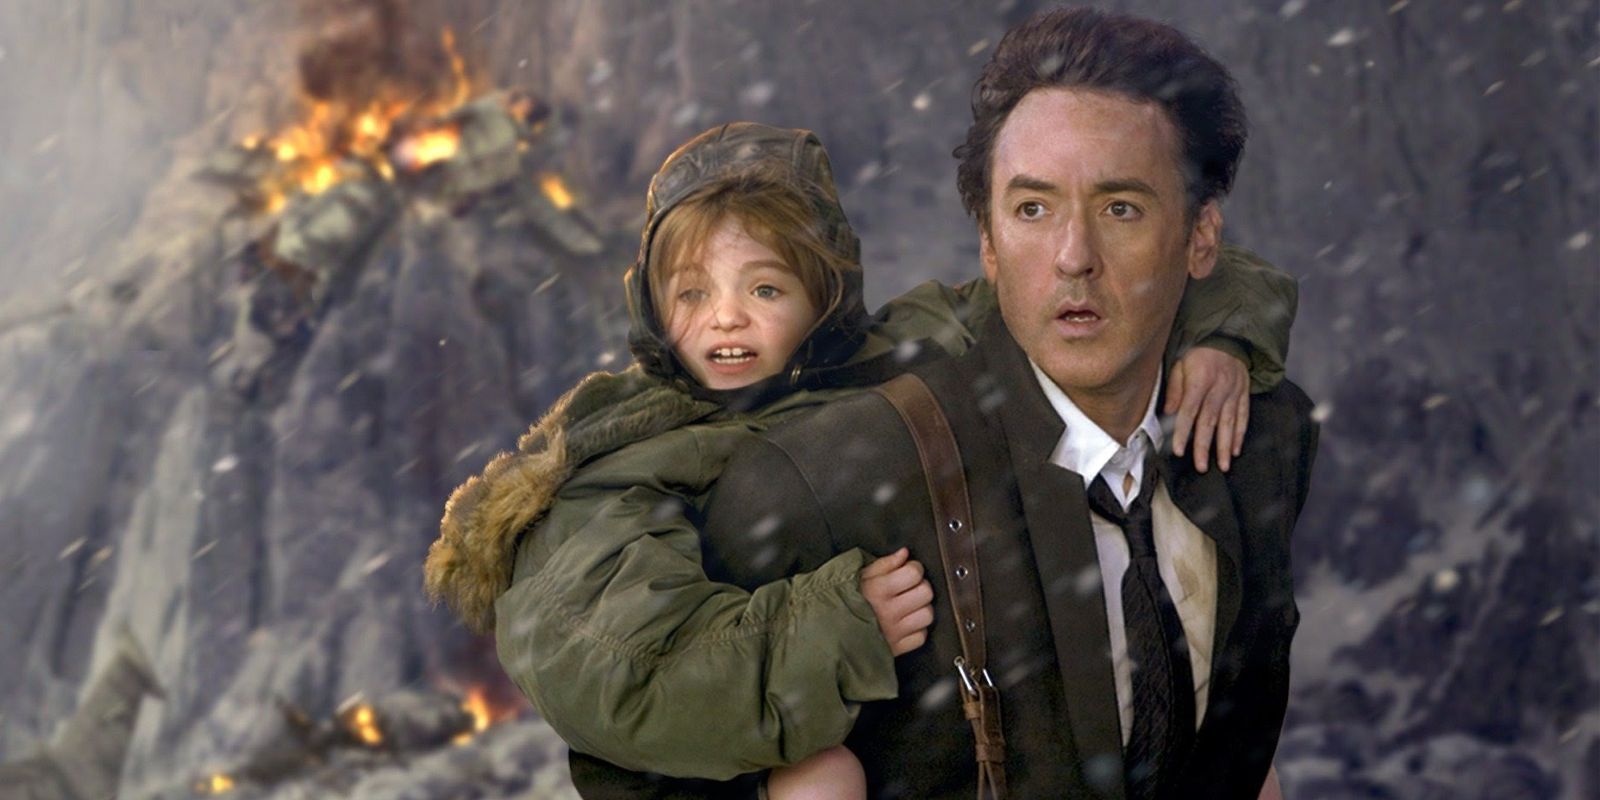 A man and his young daughter look on fearfully as as a fire and other dangers rage around them